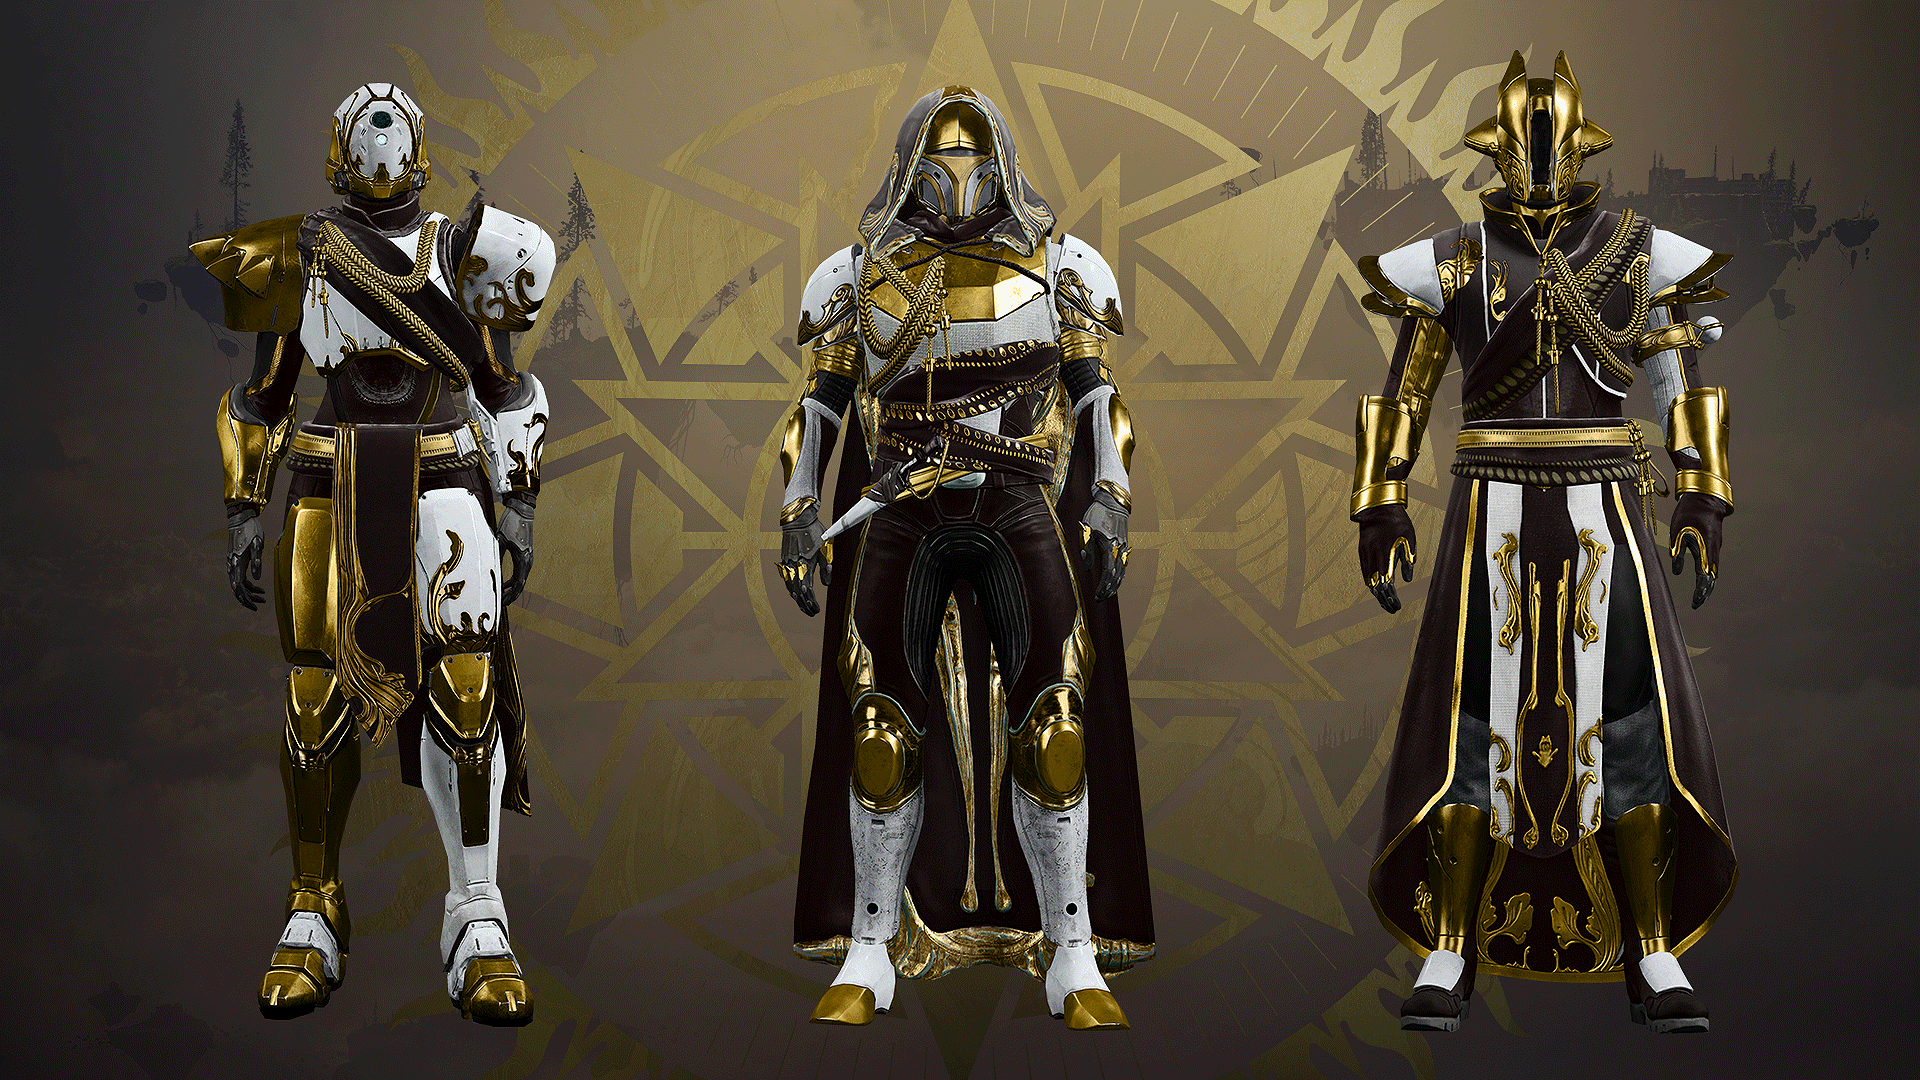 Gif of Masterworked armor for Destiny 2’s Solstice of Heroes 2019